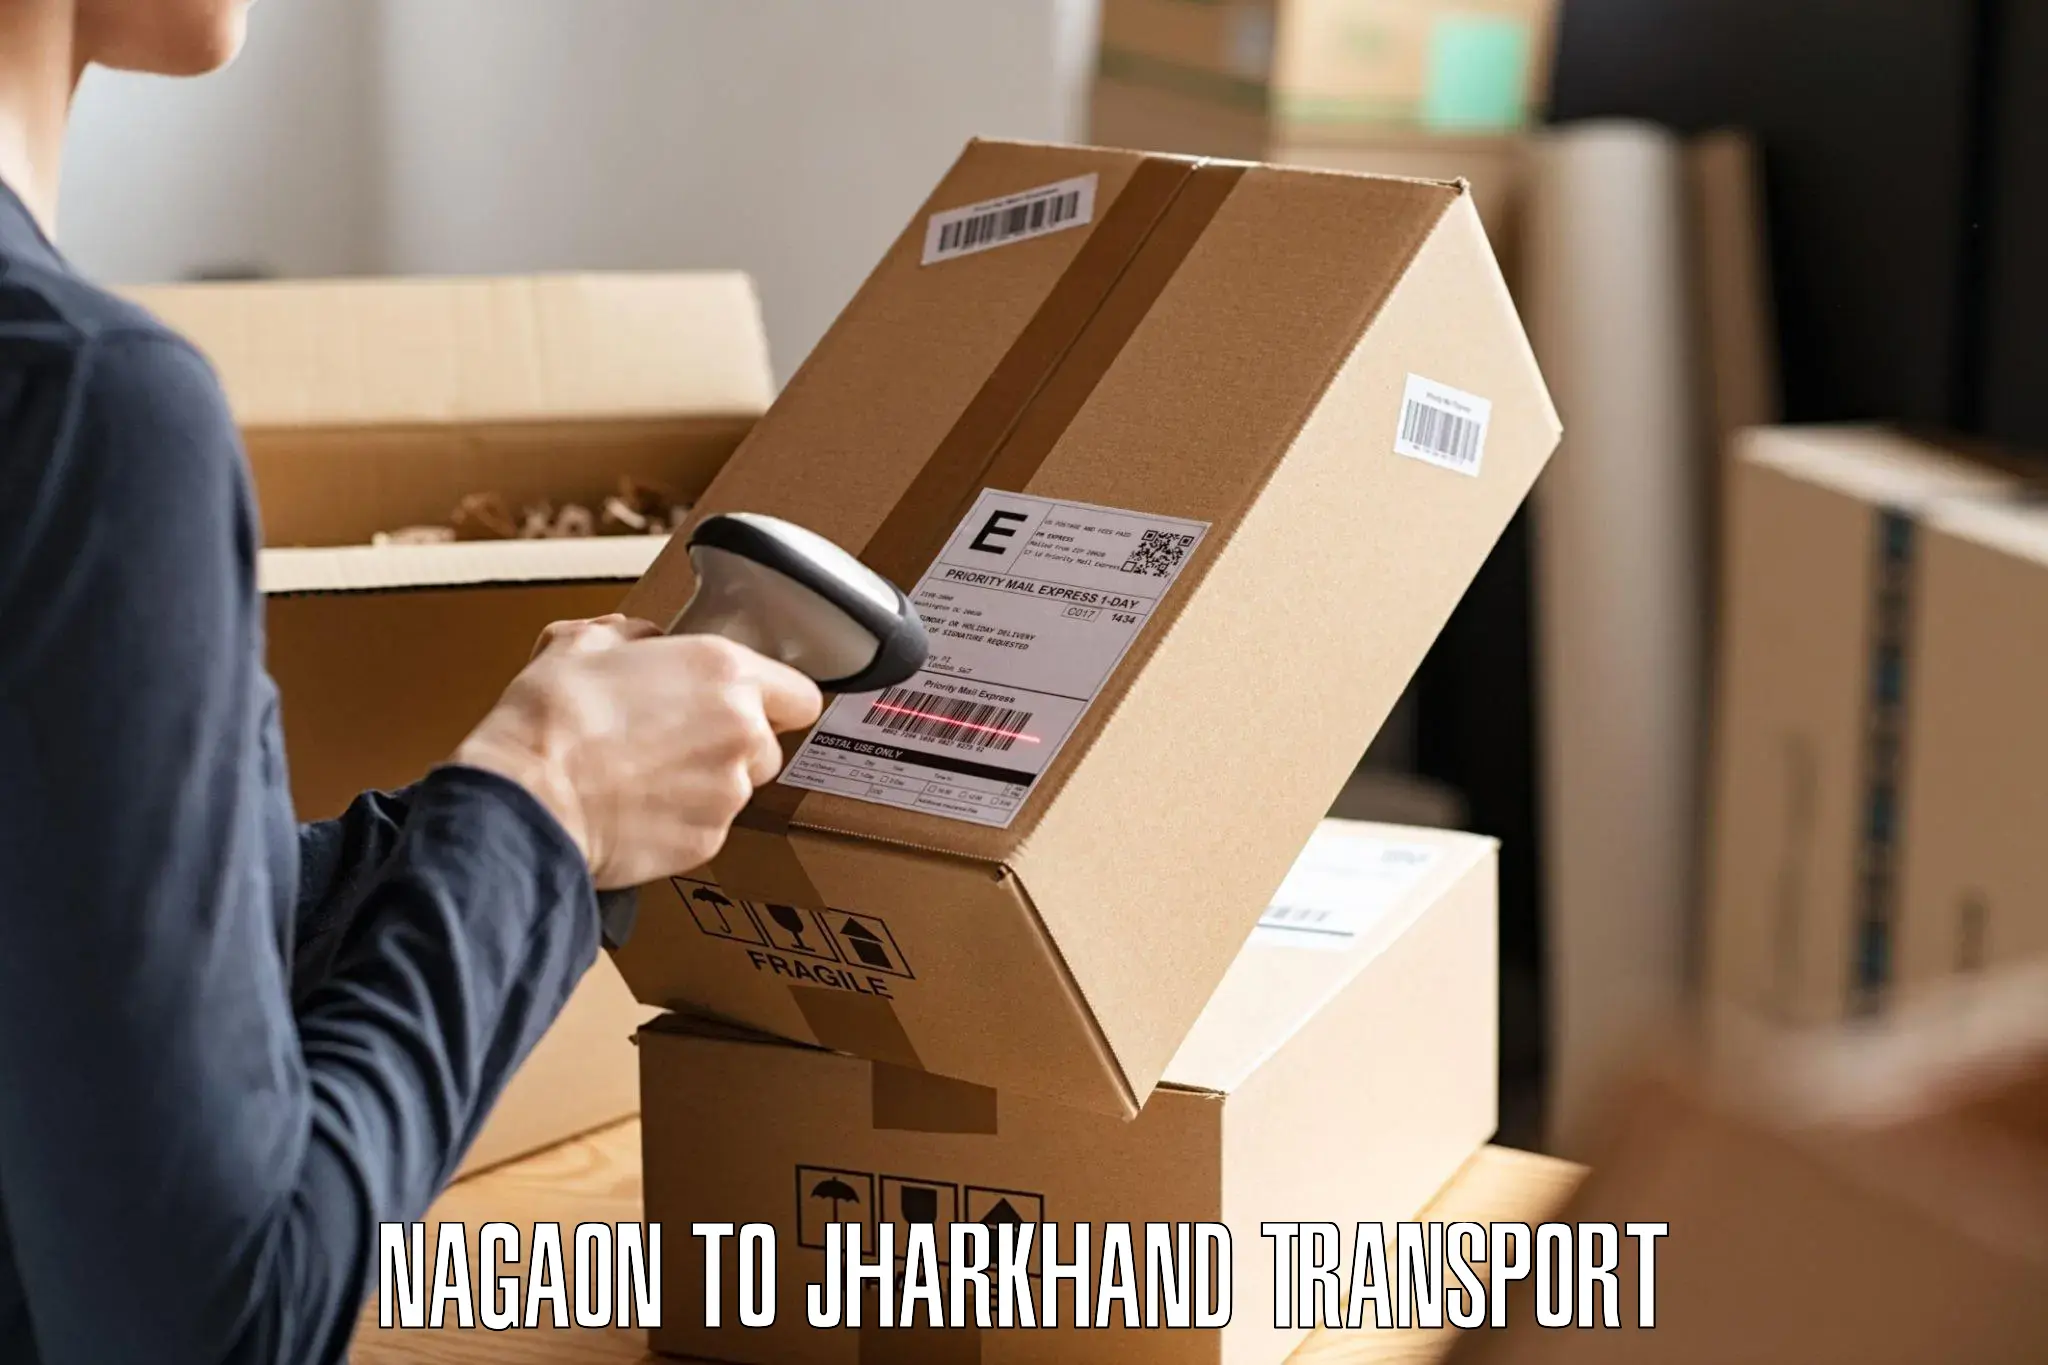 Cargo transport services in Nagaon to Topchanchi